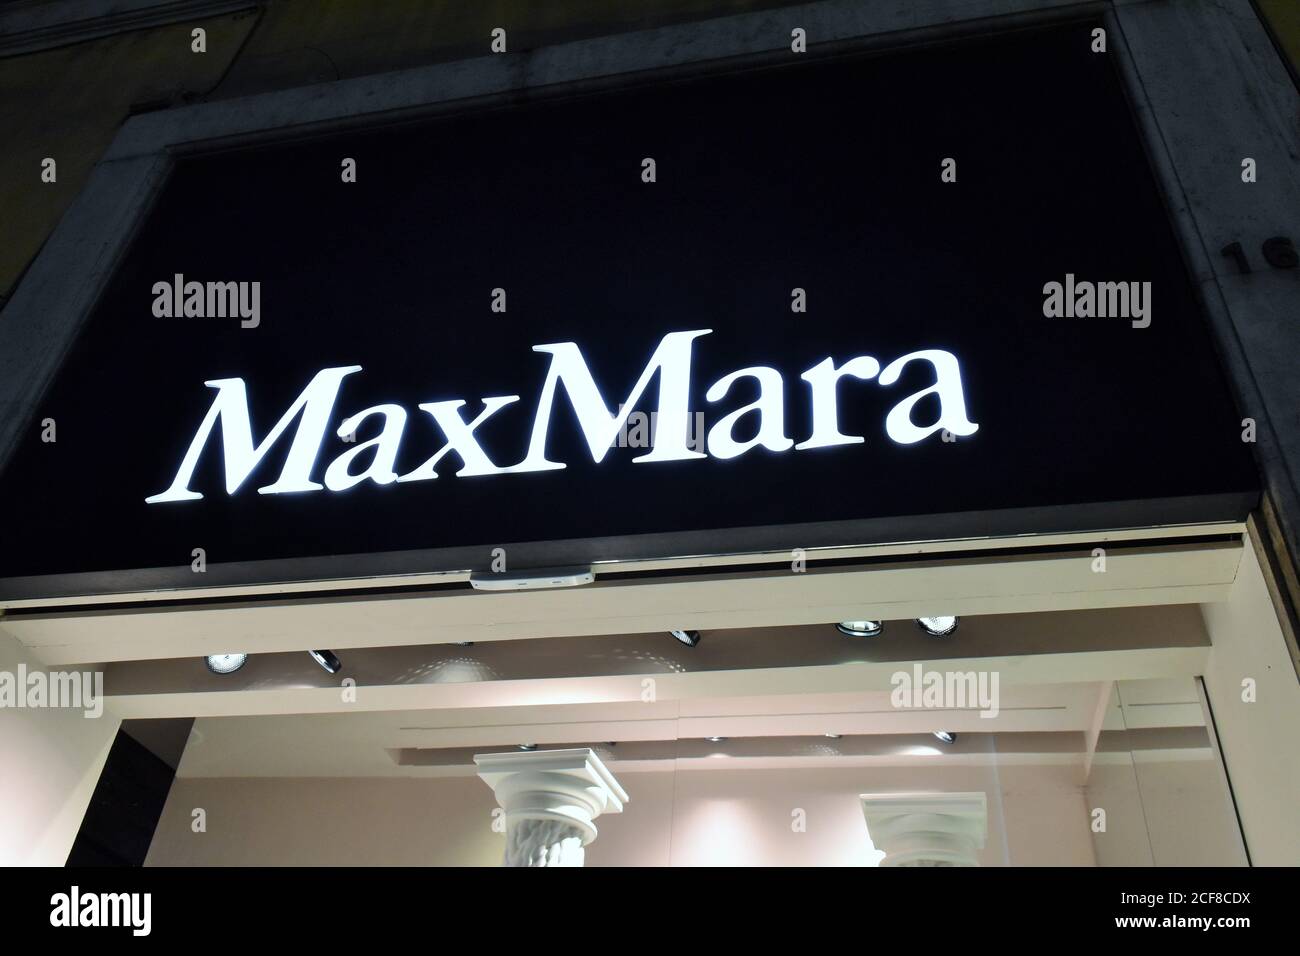 THE SIGN OF THE MAXMARA BOUTIQUE Stock Photo